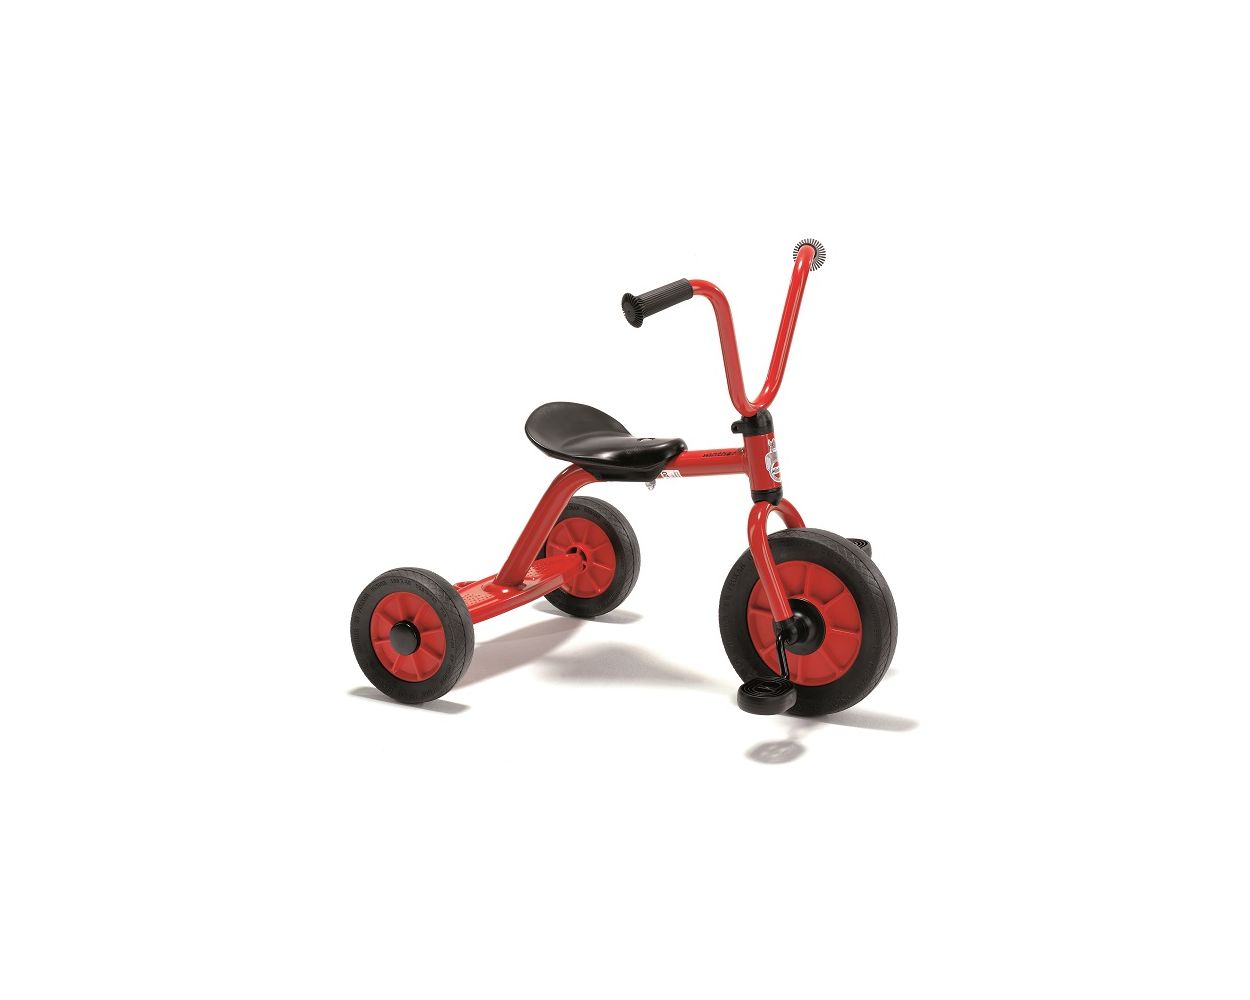 Winther Mini Viking Tricycle - Profile Education